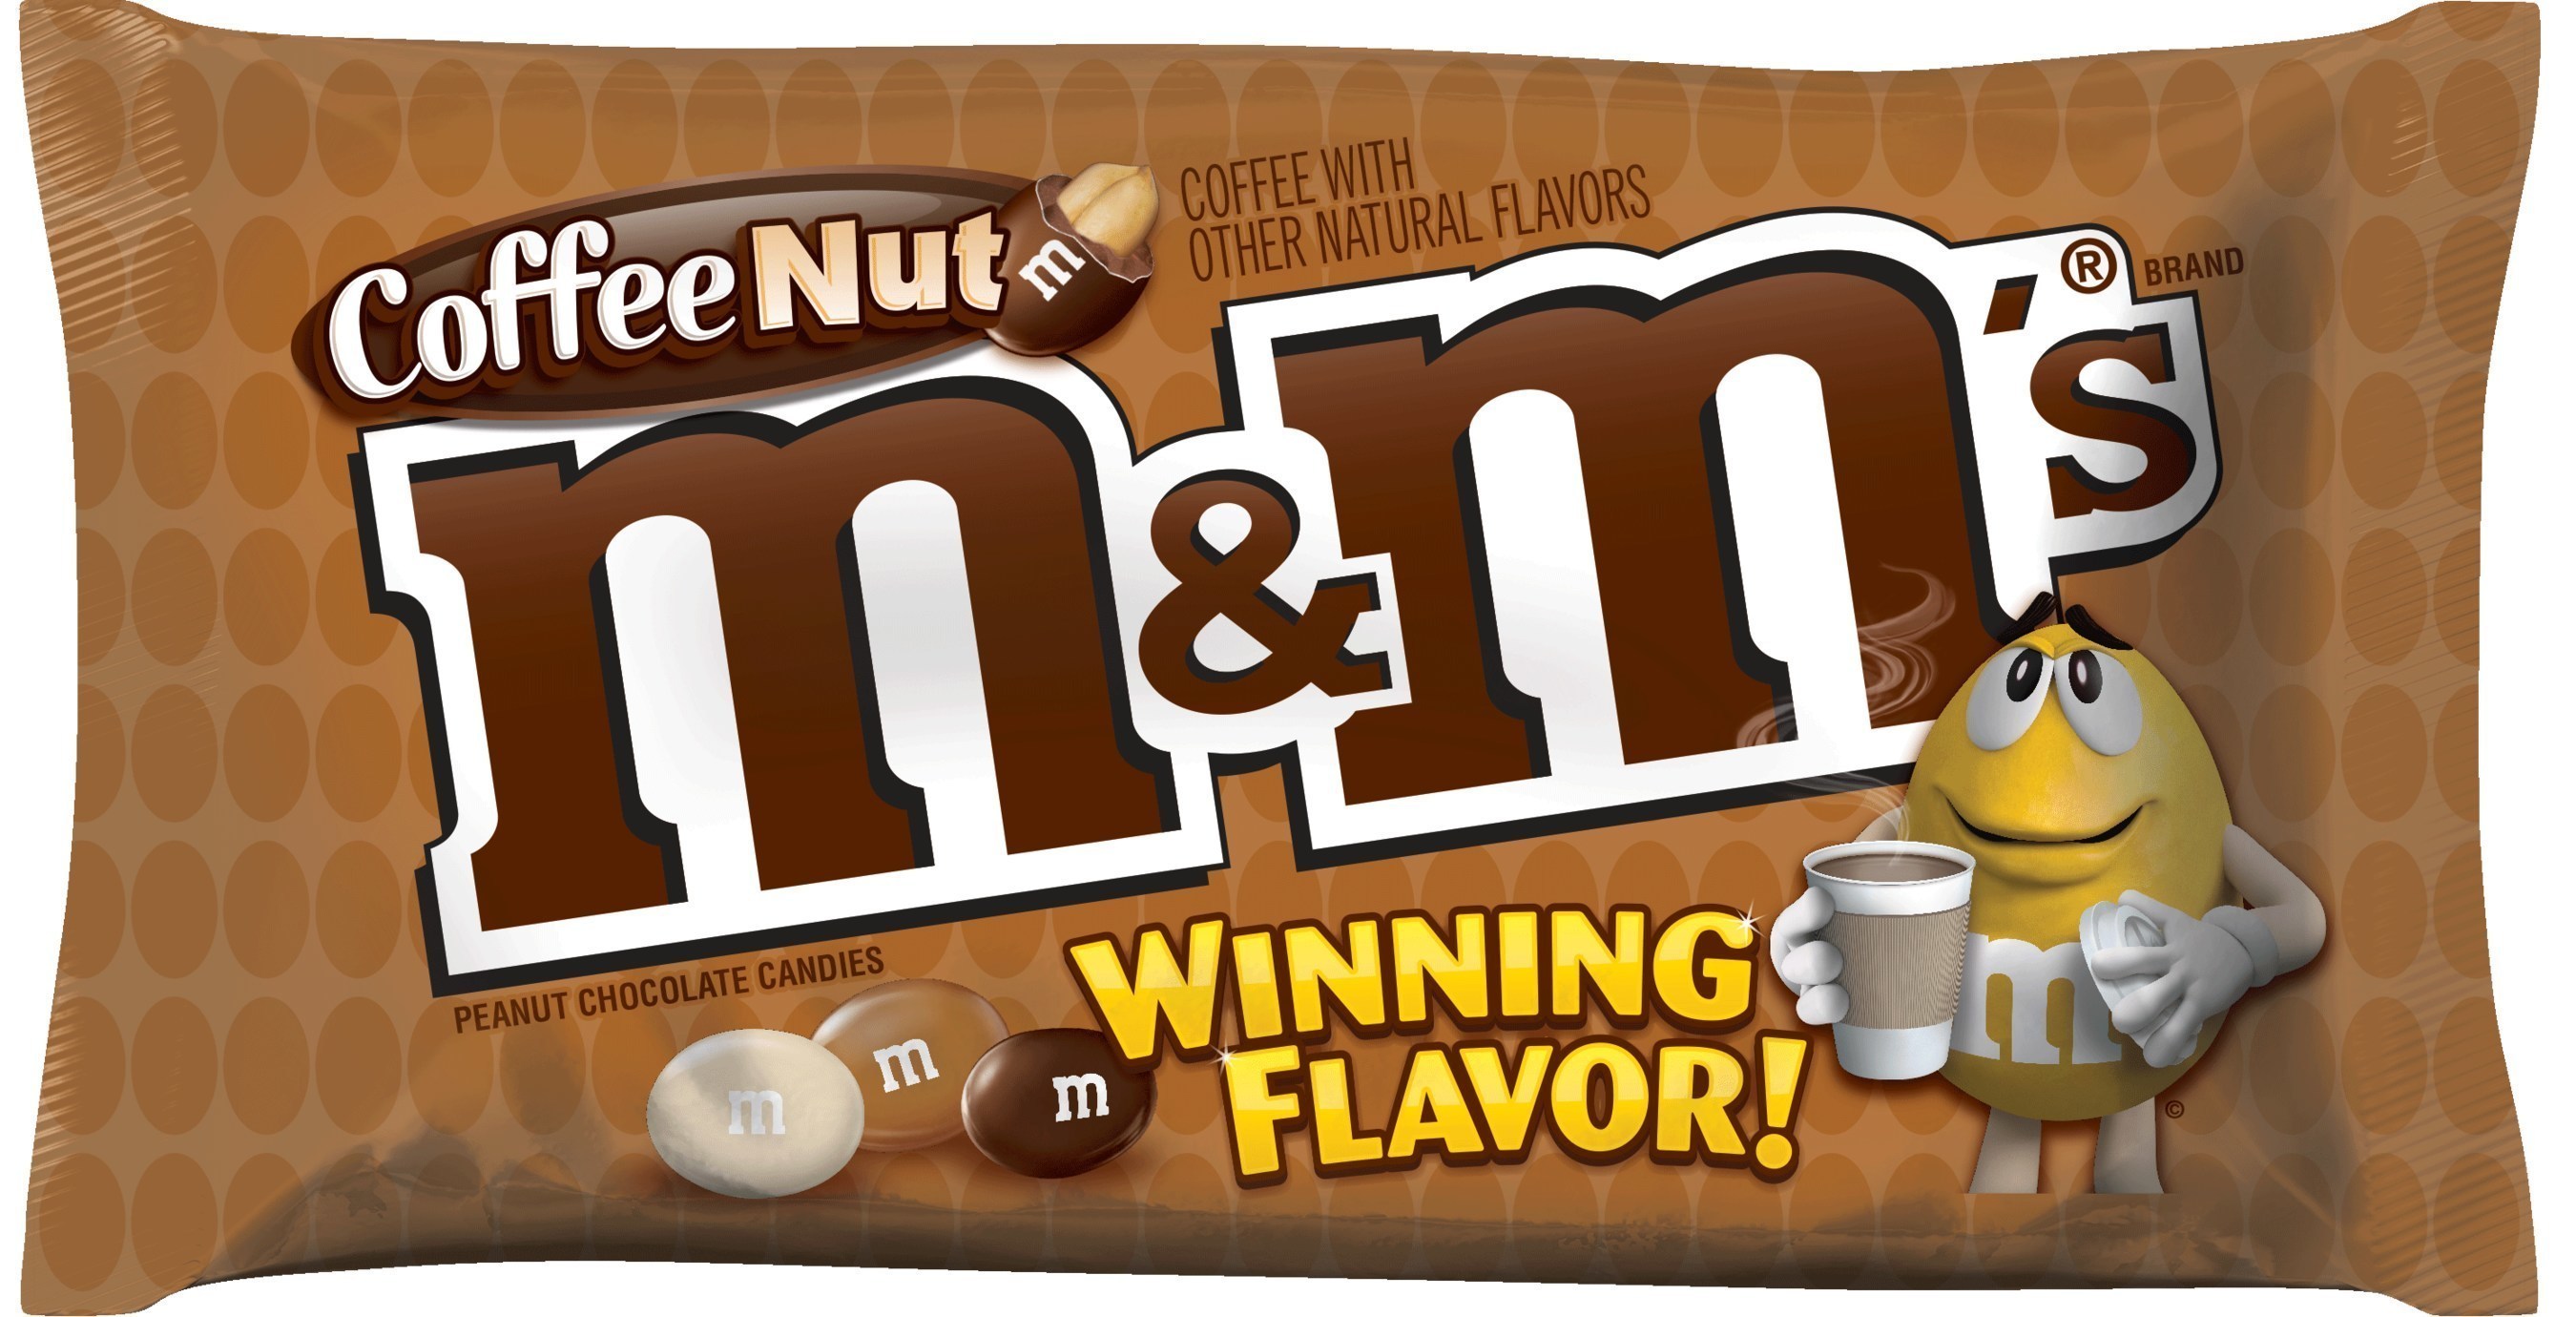 M&M'S® Announces Coffee Nut As Winning Flavor In The First Ever